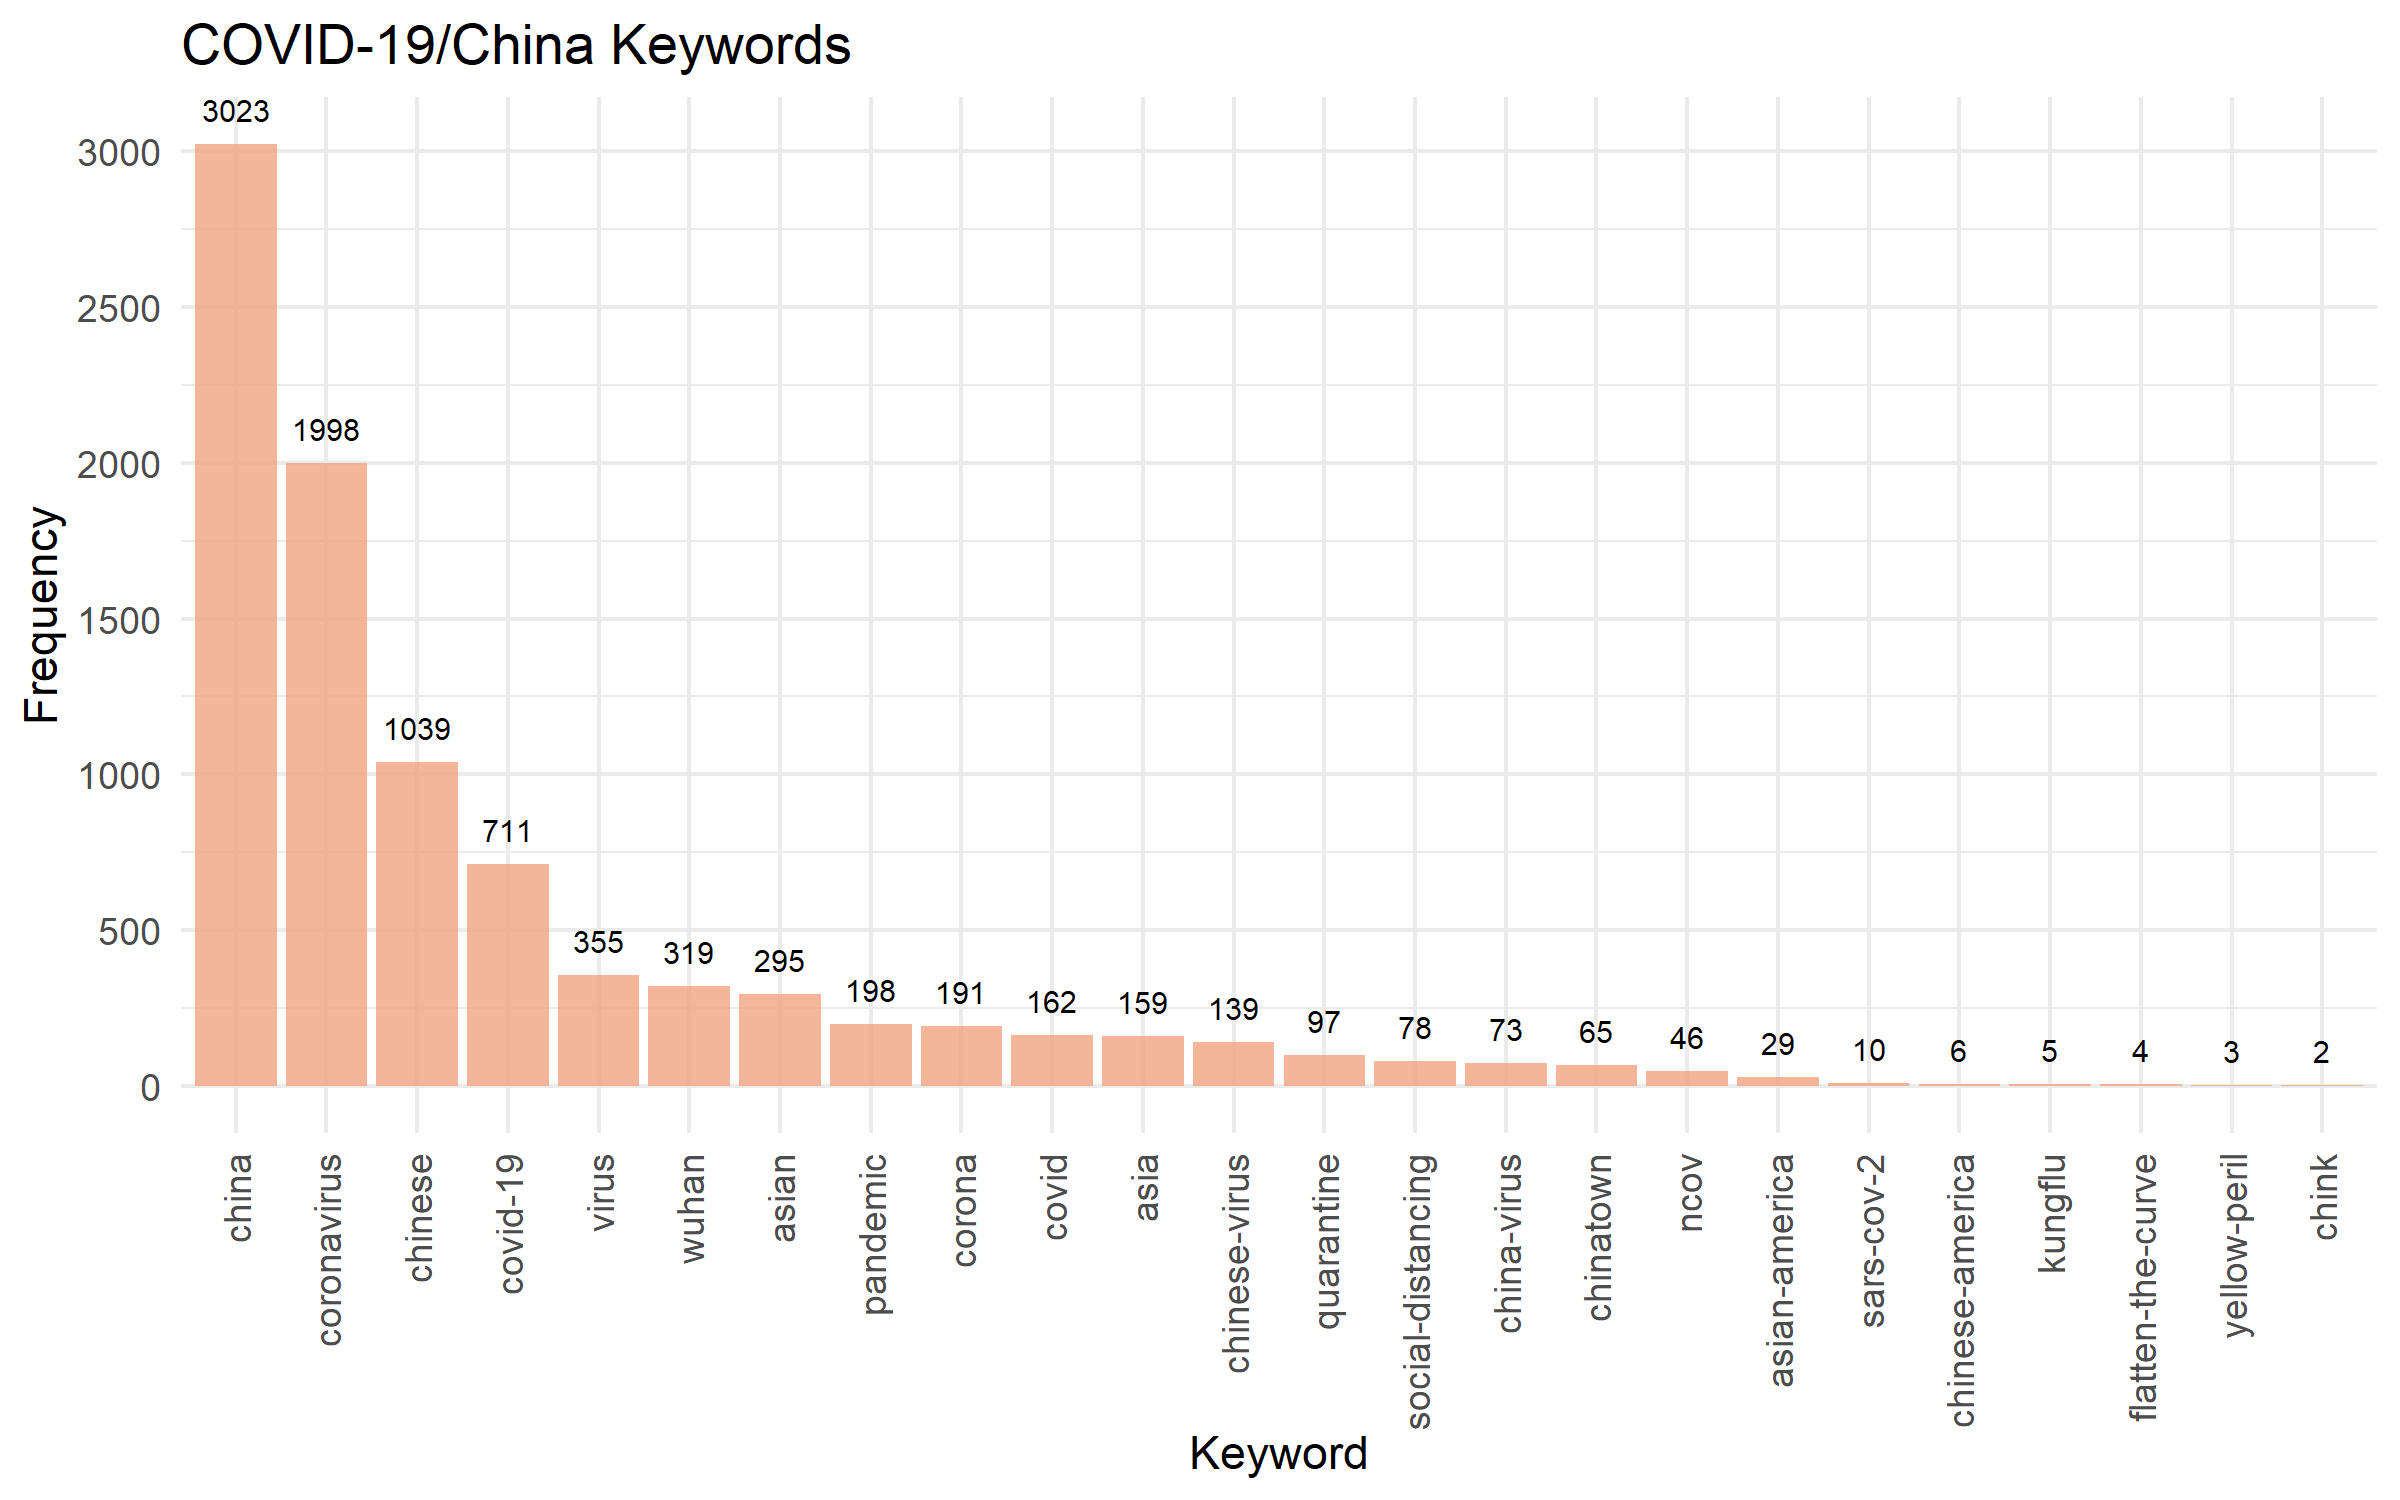  Distribution of keywords in the tweets. 